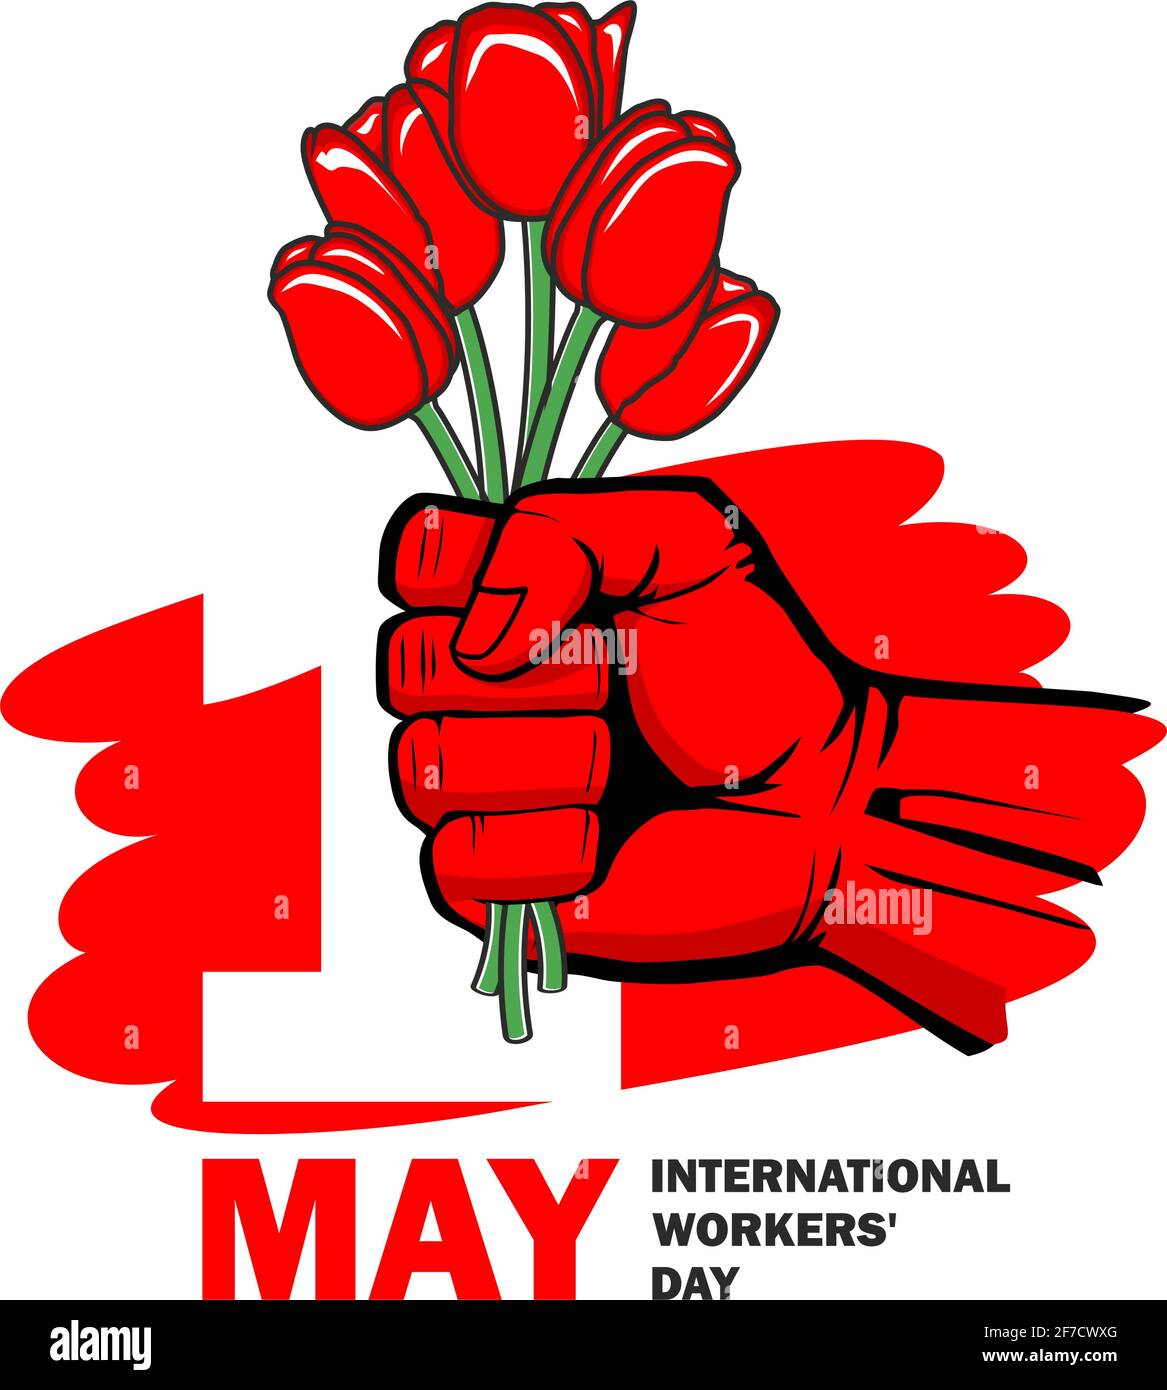 May Day greeting card for International Workers' Day. May 1 - symbol of revolutionary protest is red clenched fist raised up with red tulip flowers. V Stock Vector